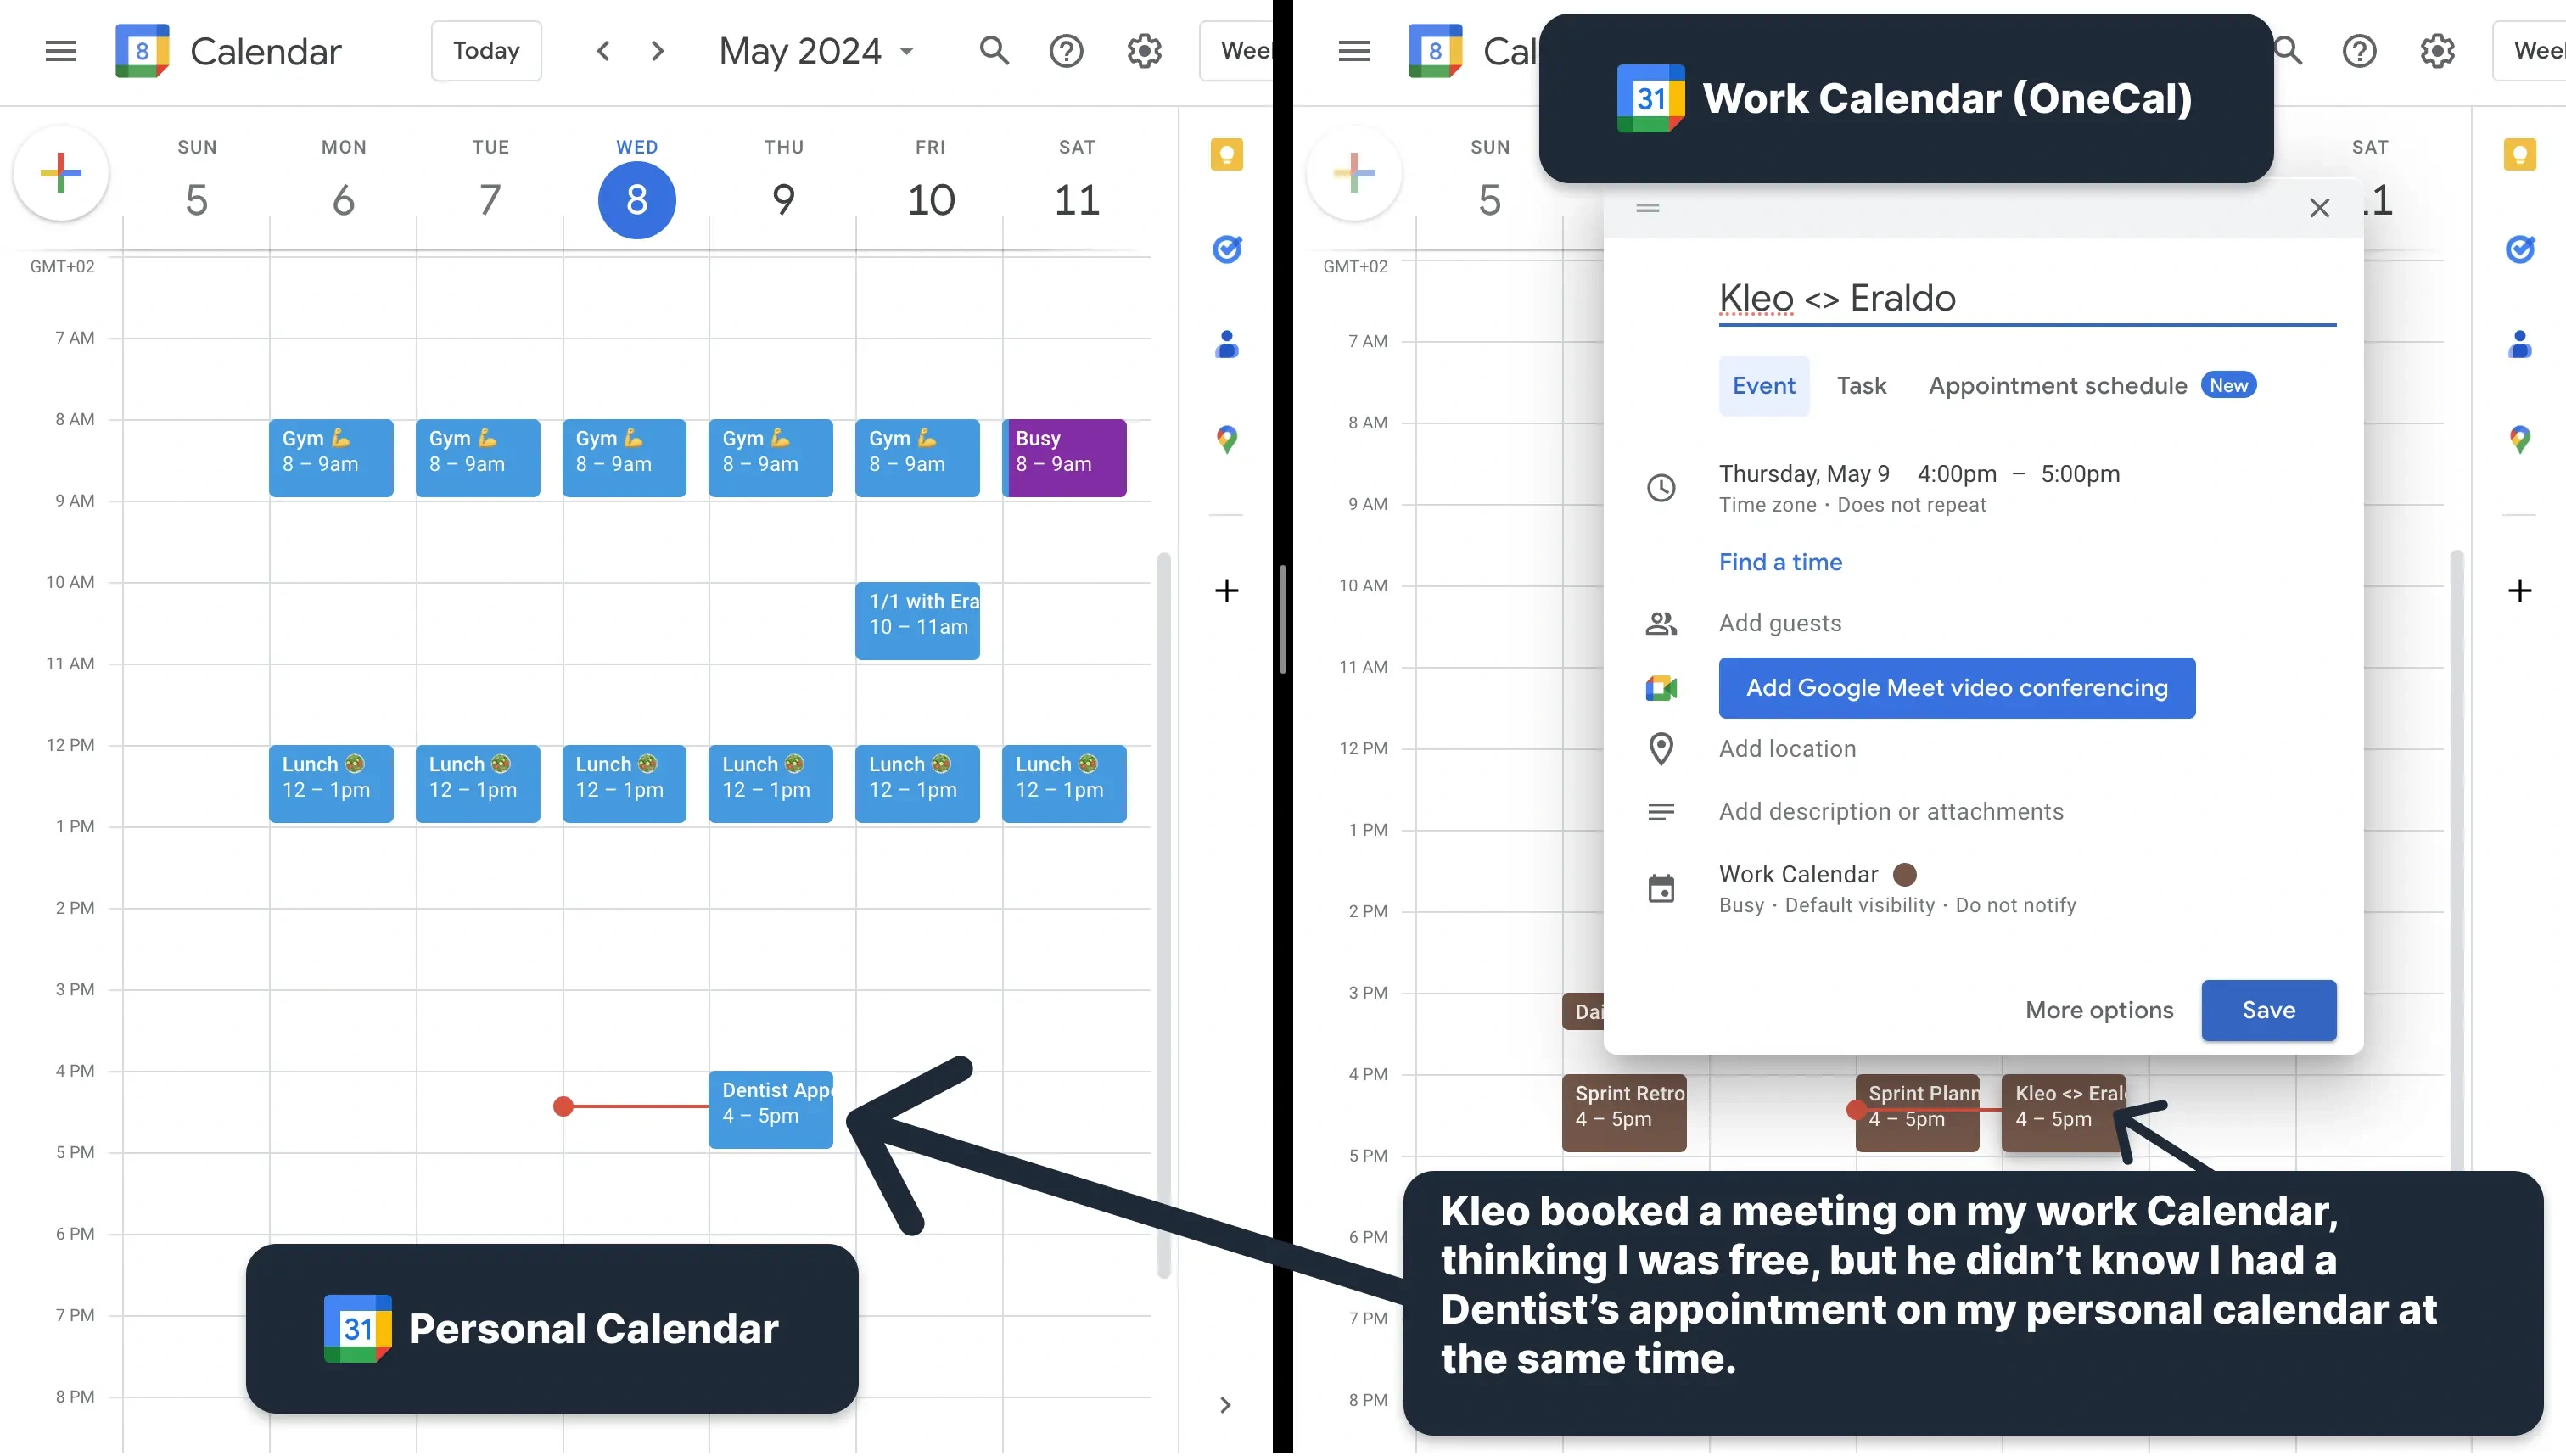 Double booking eue to not merging Google Calendars